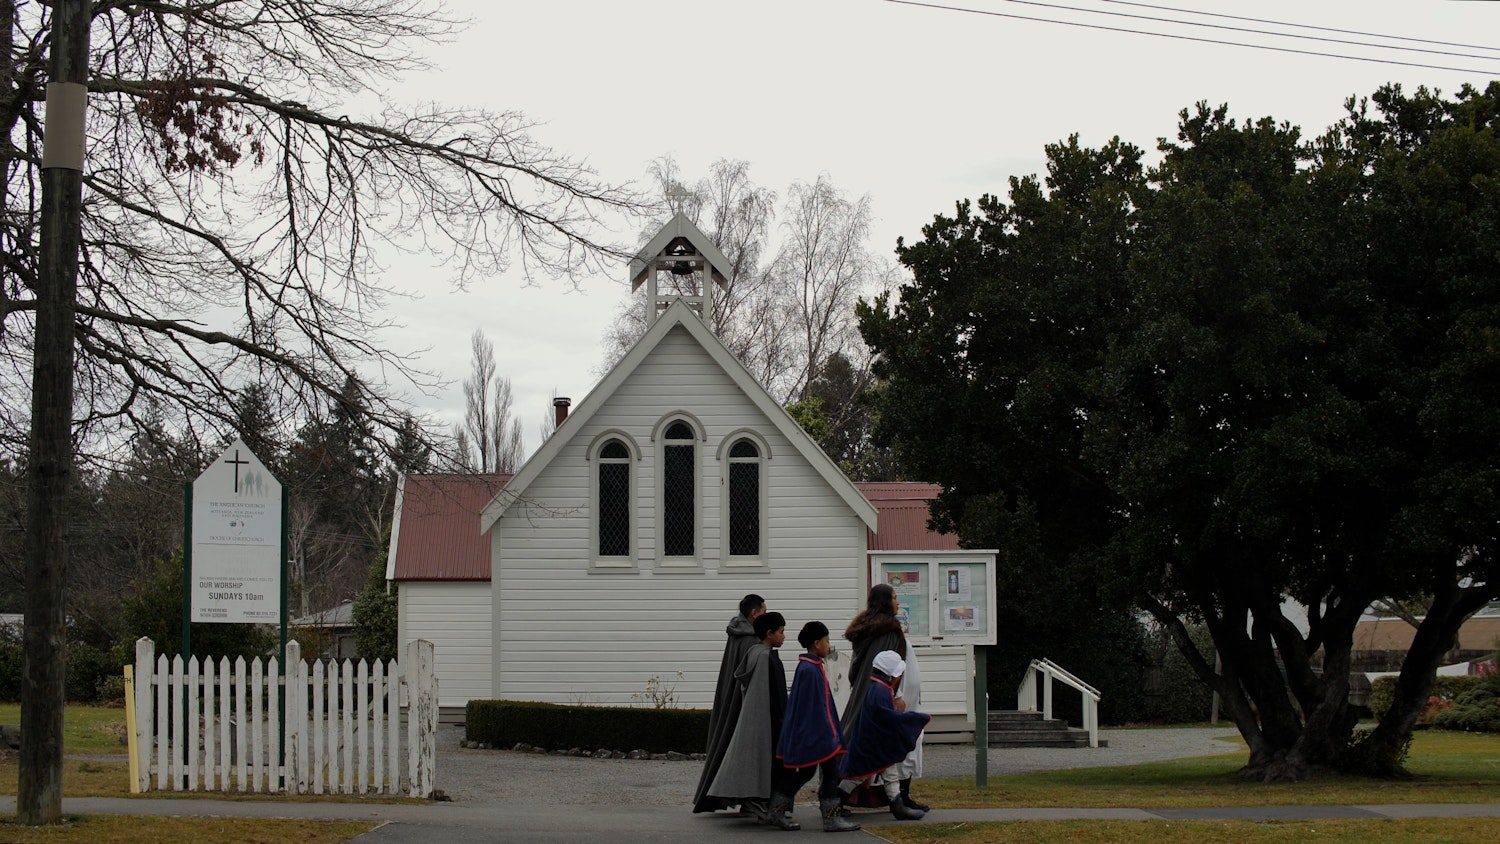 A woman and four children in historic clothing walk past a gothic-seeming wooden church. The sky is grey and ominous.